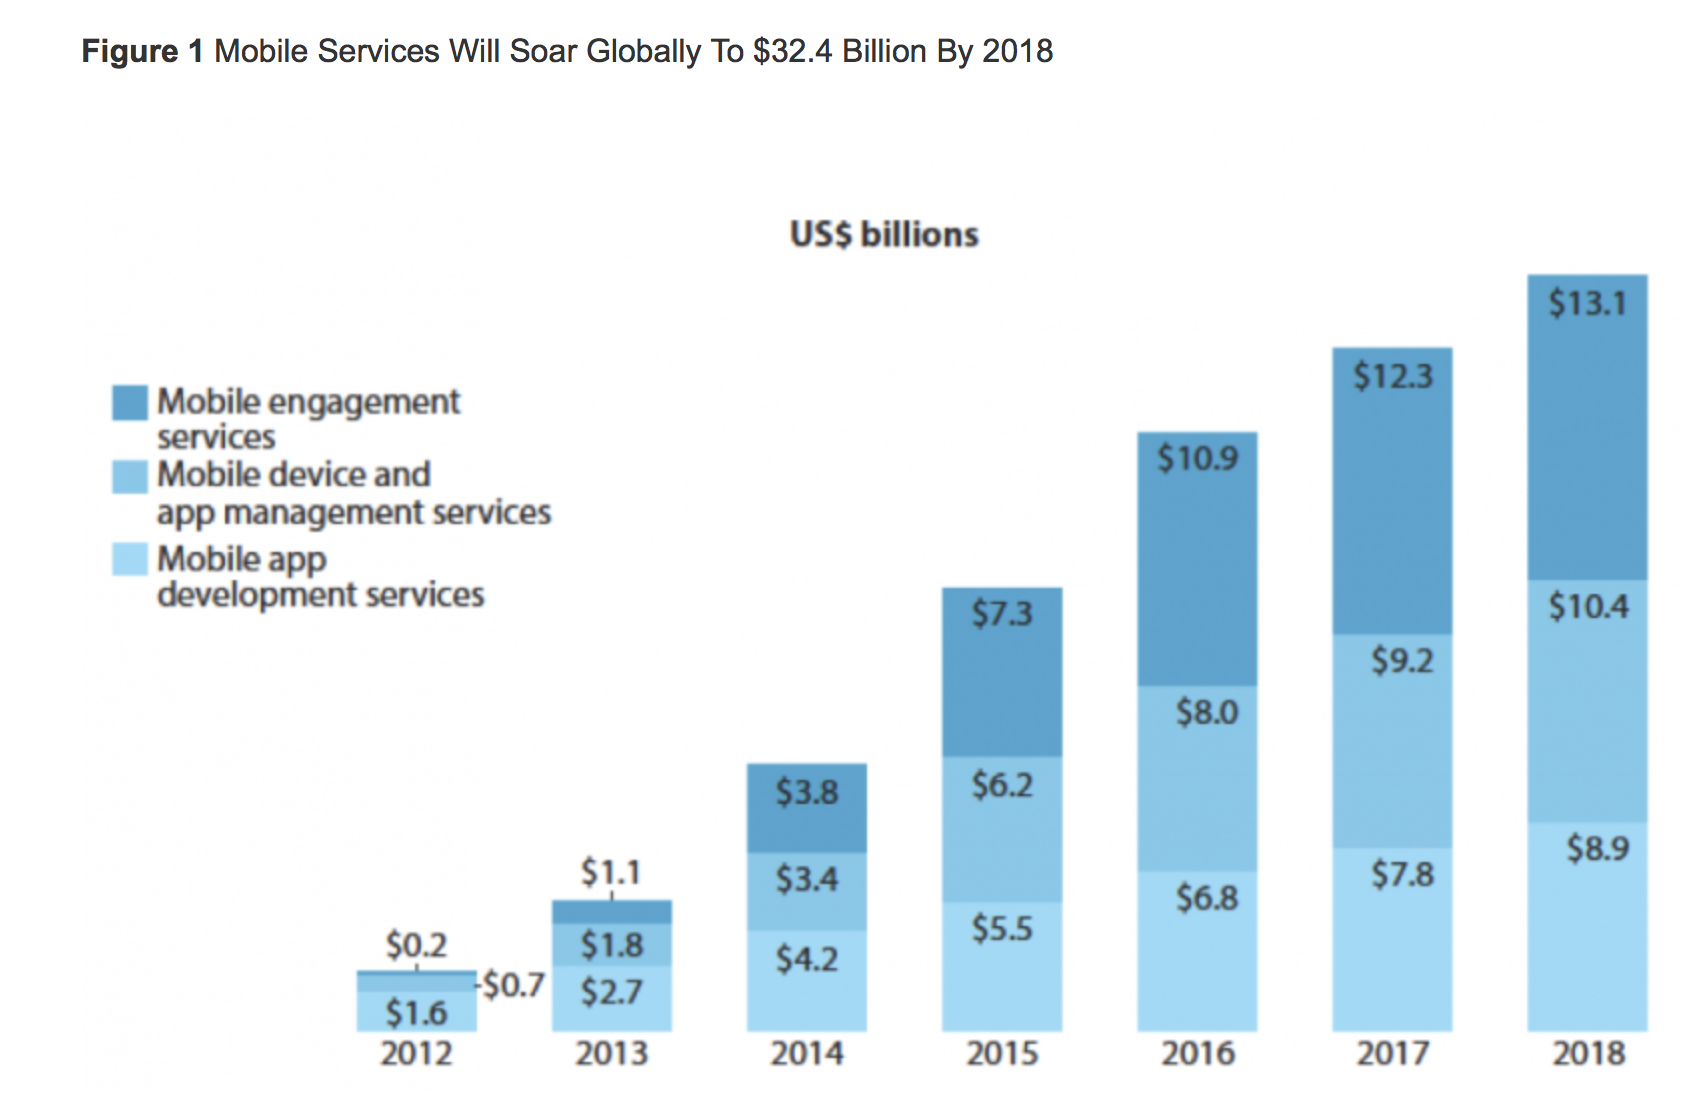 Mobile Services Will Soar Globally To $32.4 Billion By 2018